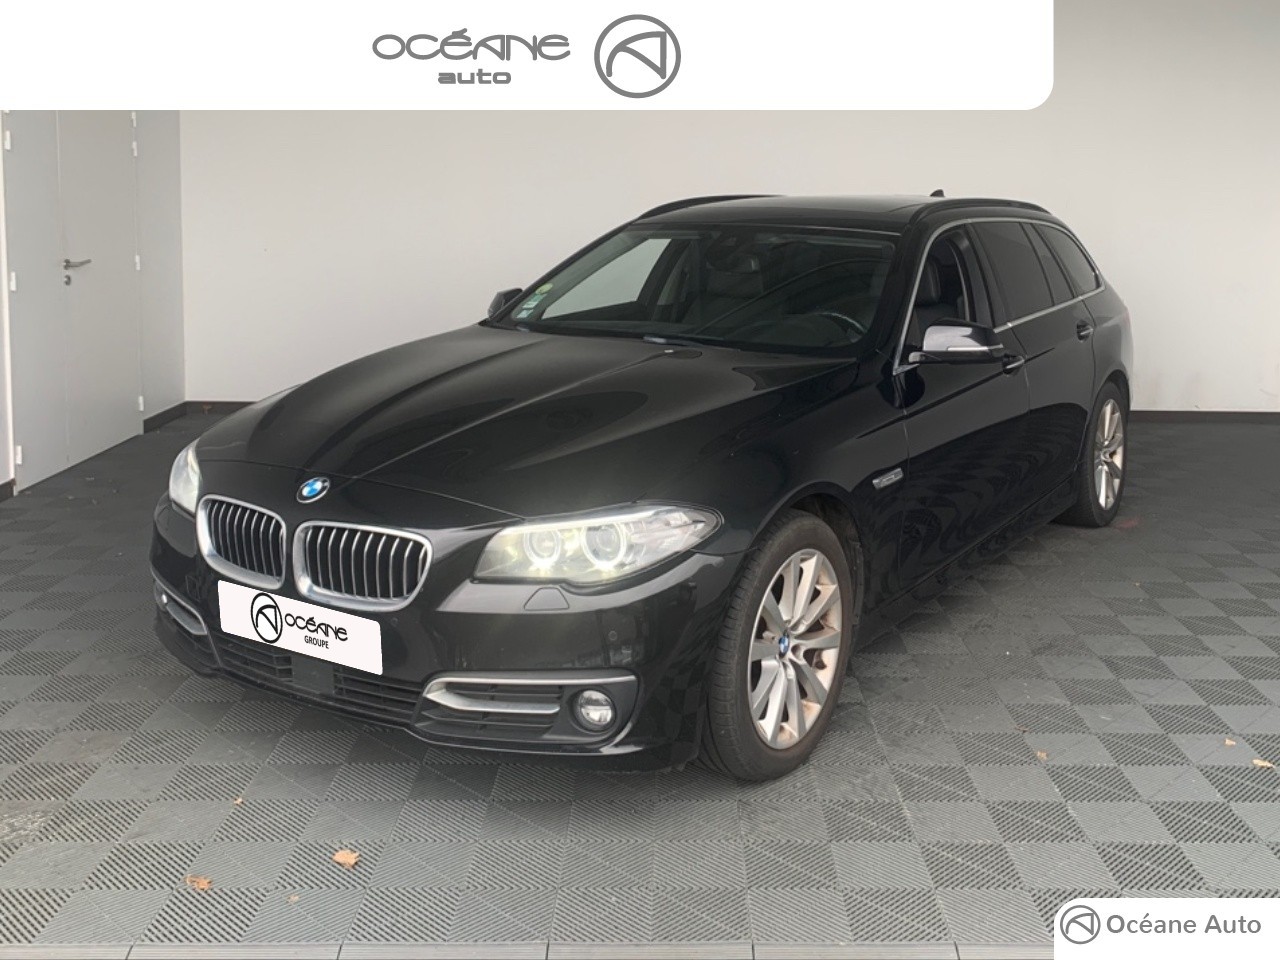 BMW Touring 525d 218 ch Luxury A - Véhicule Occasion Océane Auto